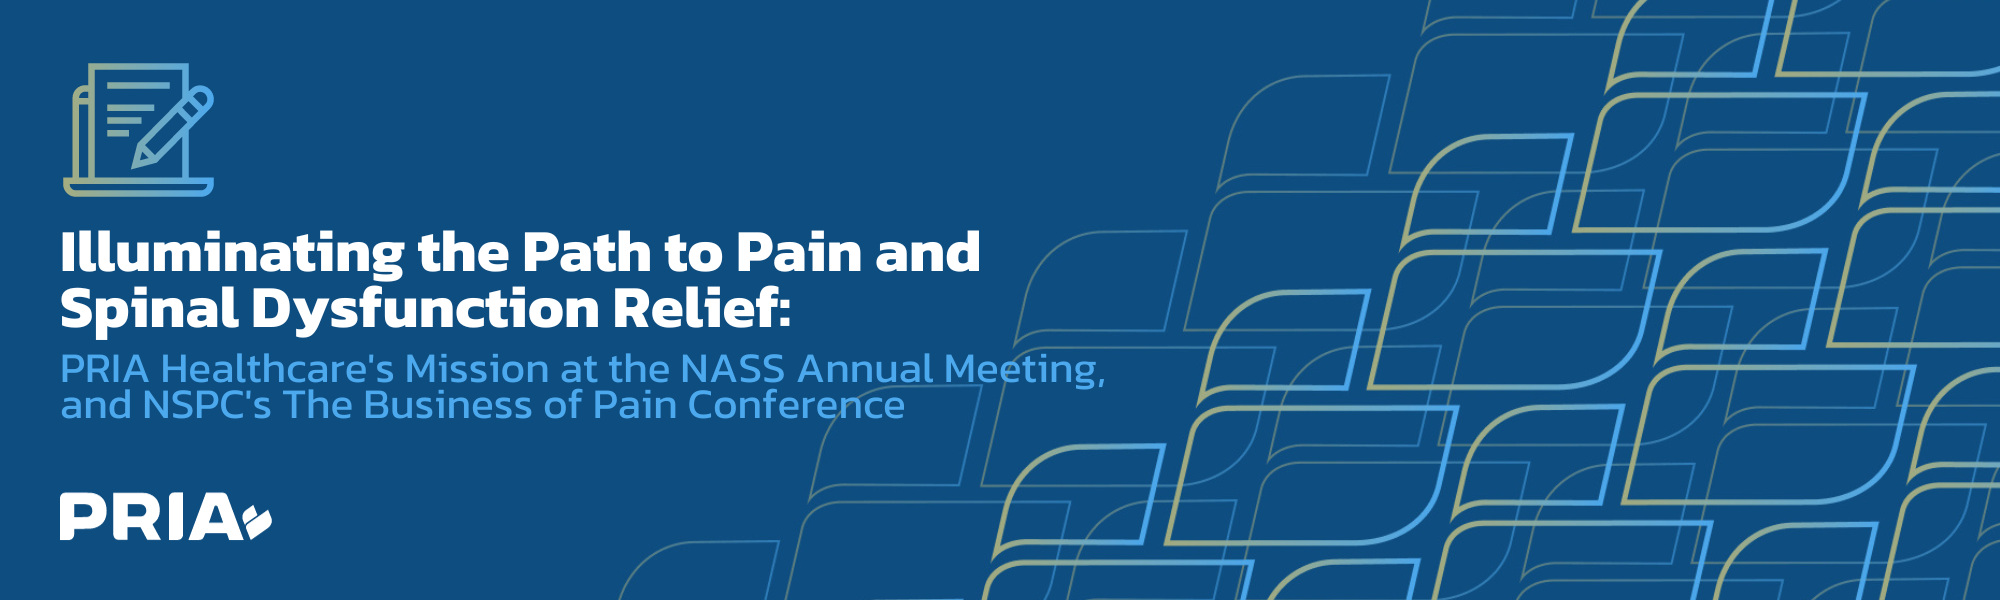 Illuminating the Path to Pain and Spinal Dysfunction Relief: PRIA Healthcare's Mission at the NASS Annual Meeting, and NSPC's The Business of Pain Conference